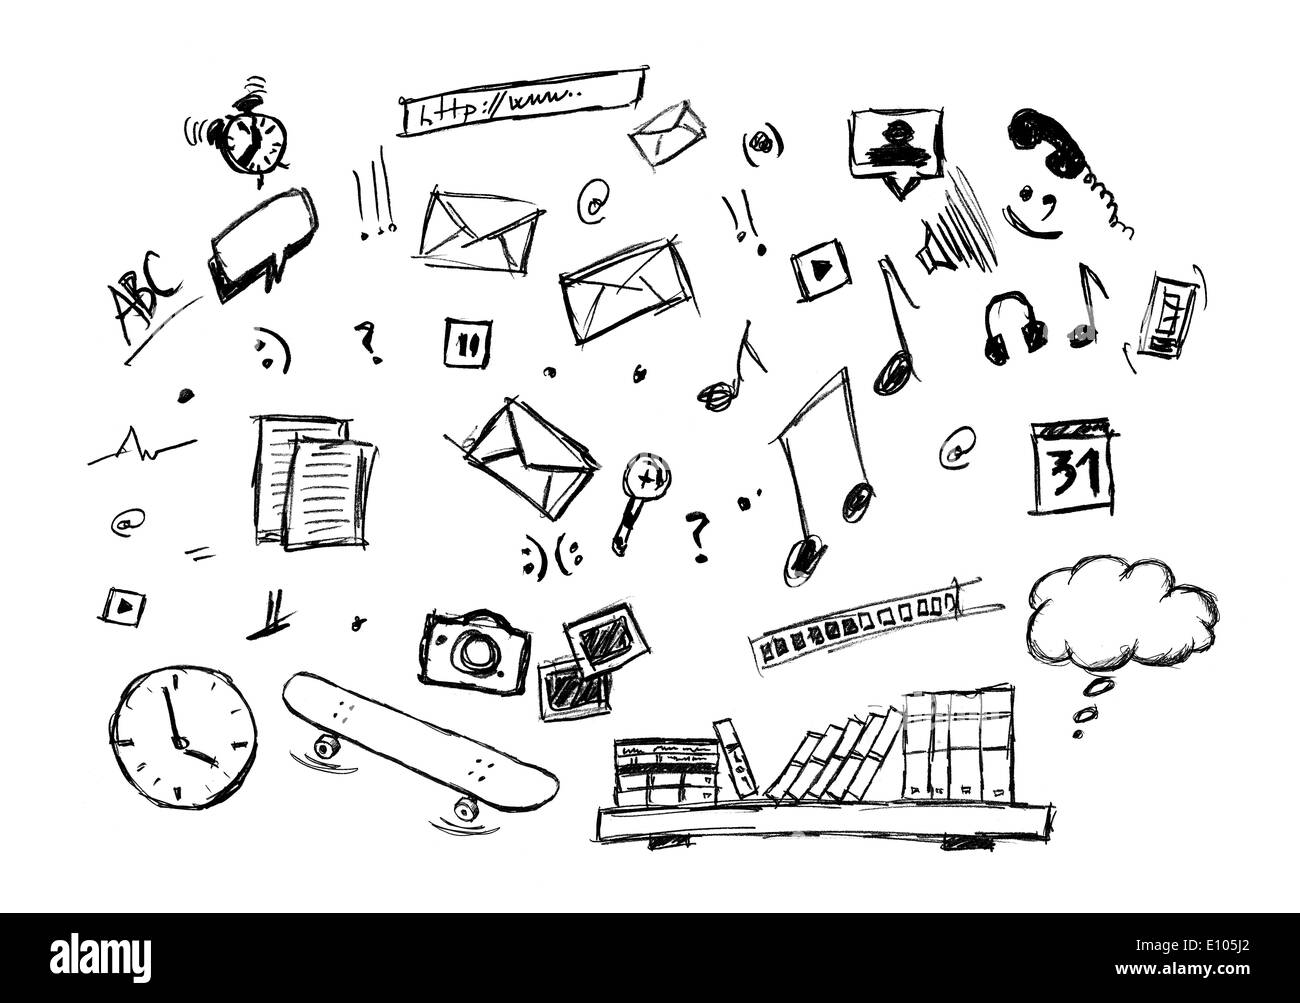 Various doodle drawing of lifestyle icons. Music, e-mail, educations, sports, internet etc. Stock Photo